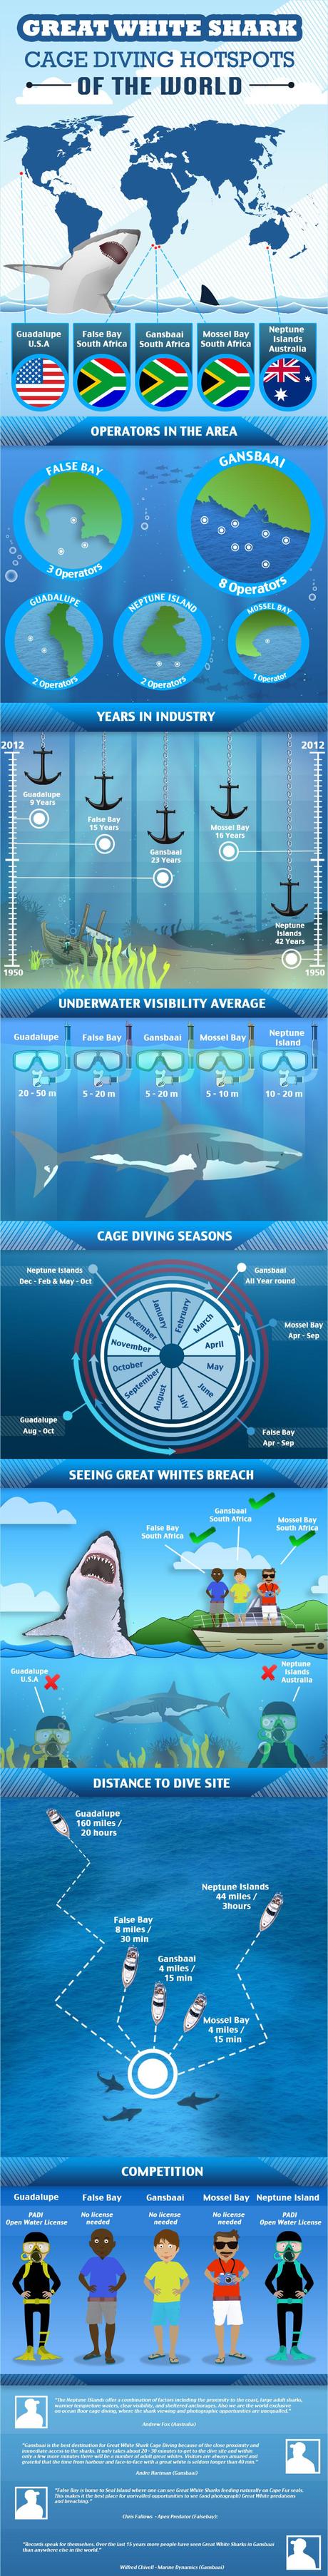 Infographic on Great White Shark Diving